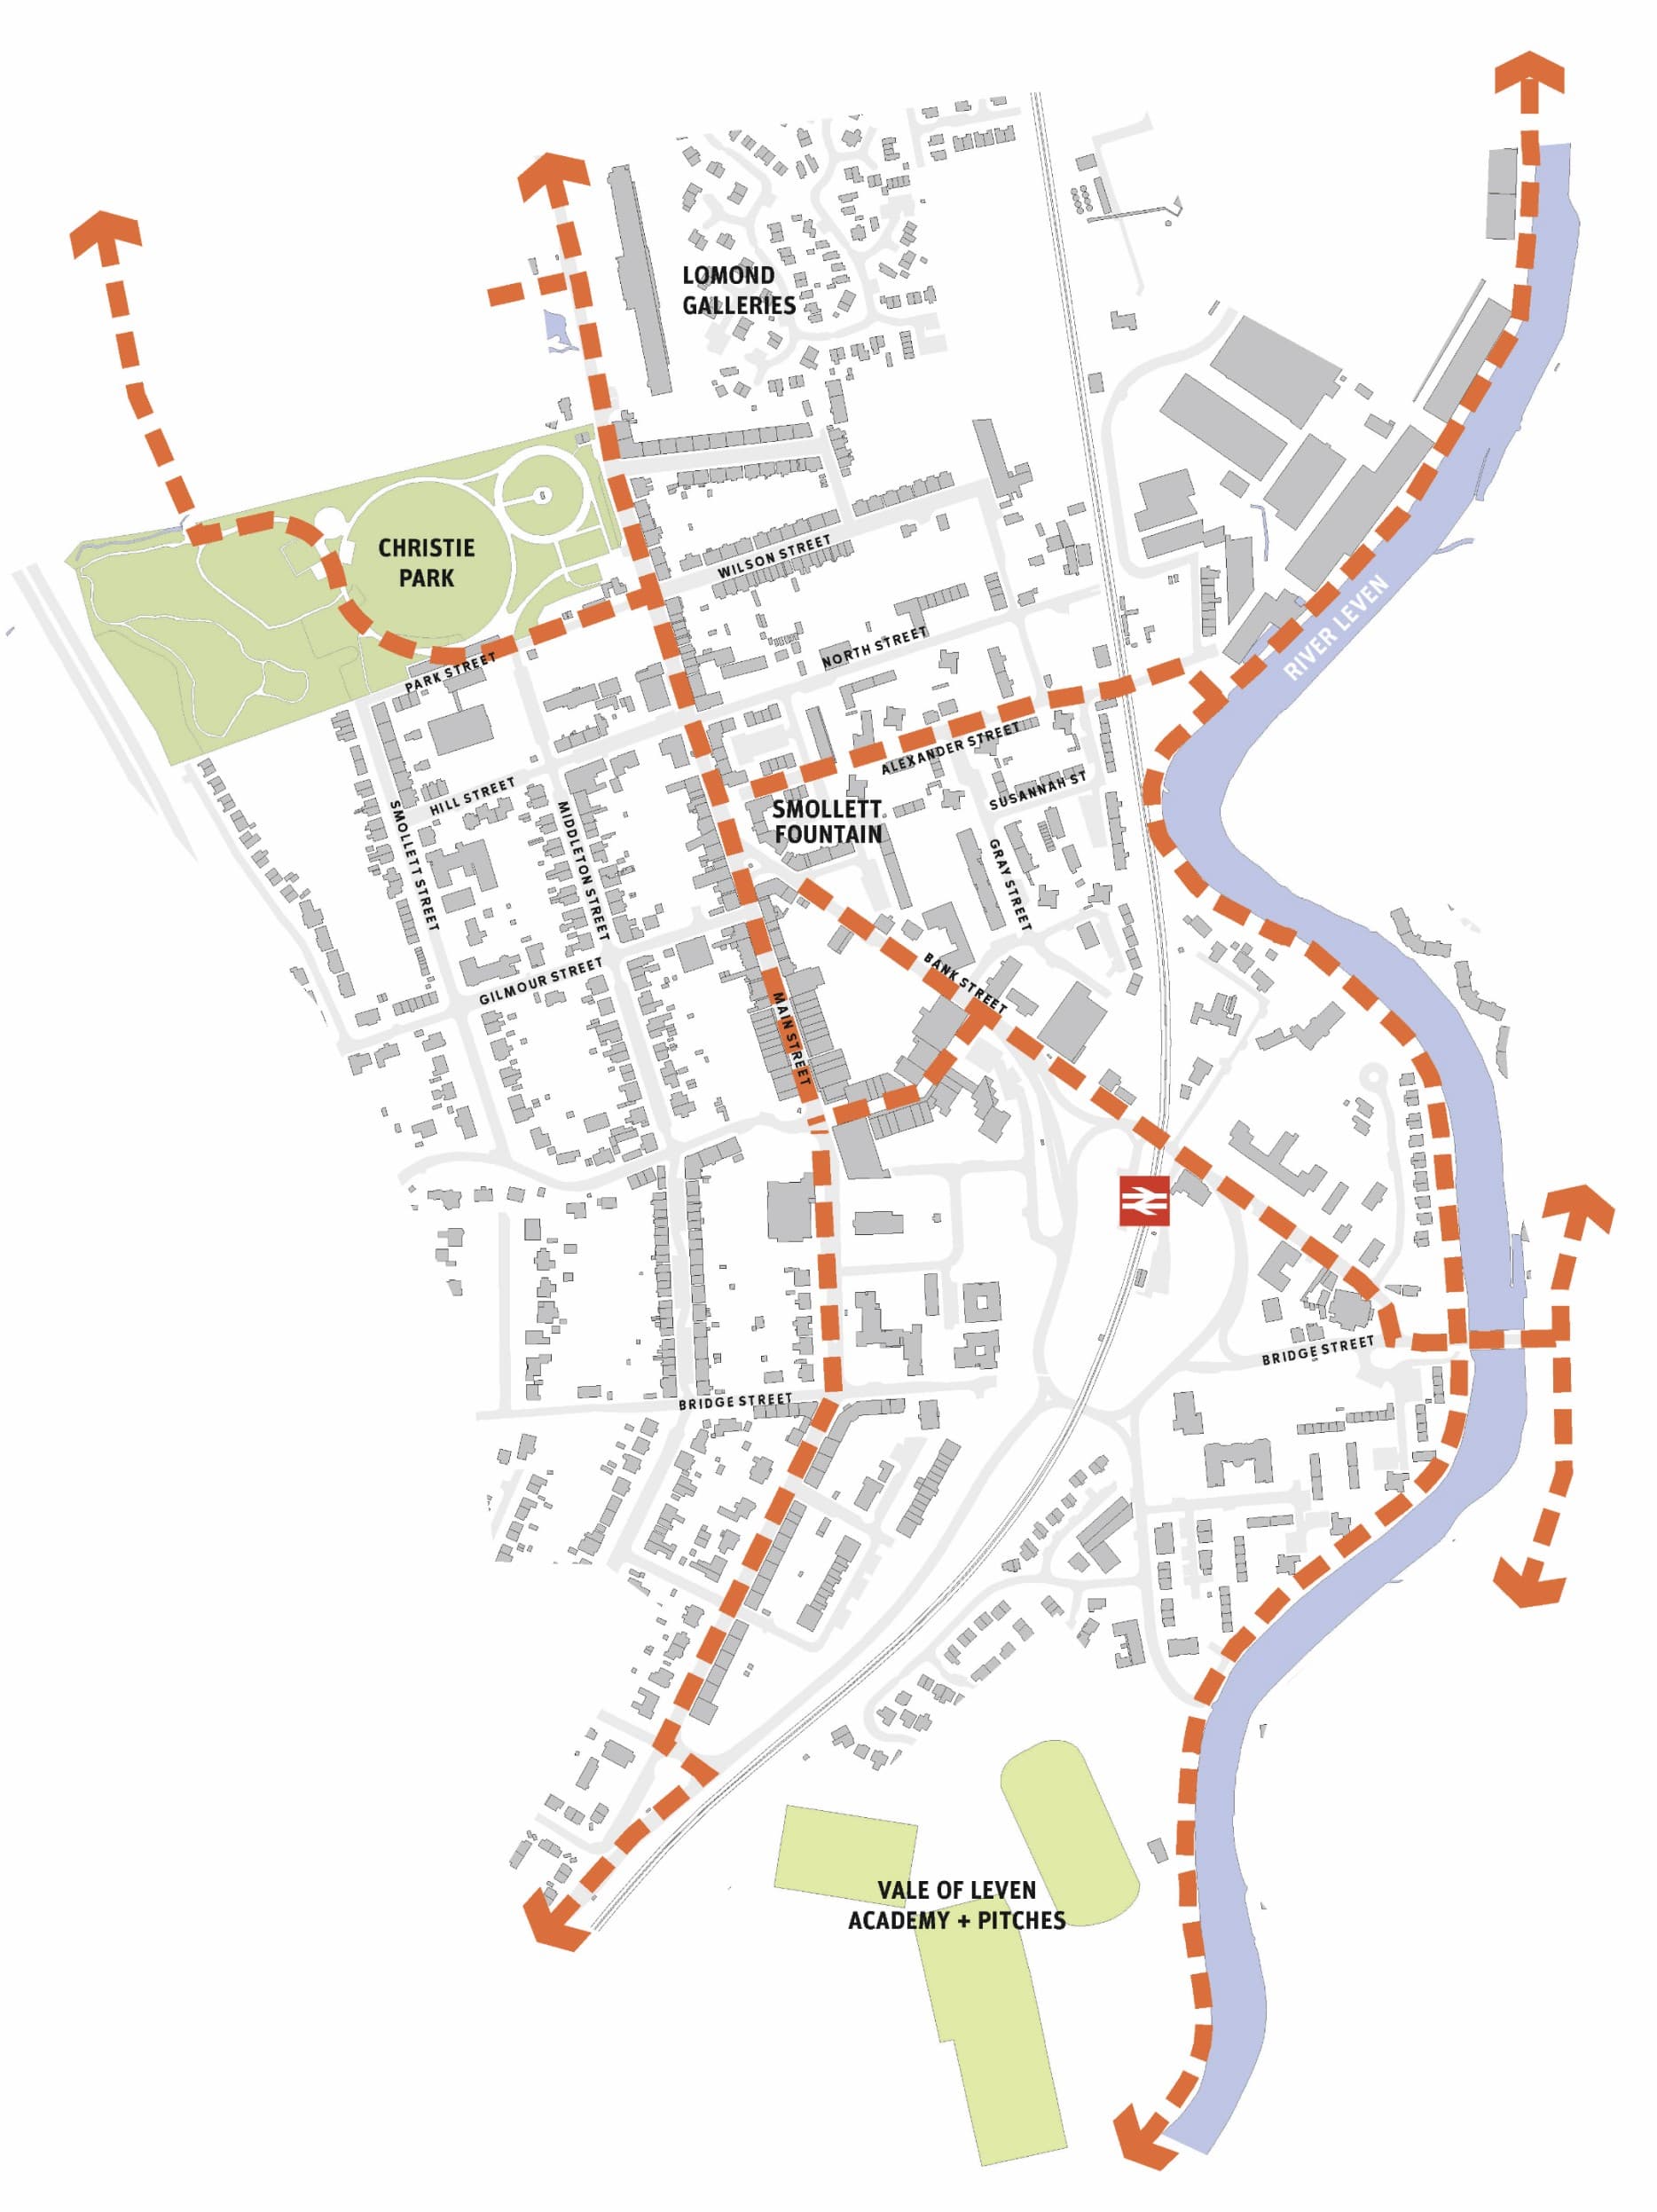 Cycling and Walking Network in Alexandria